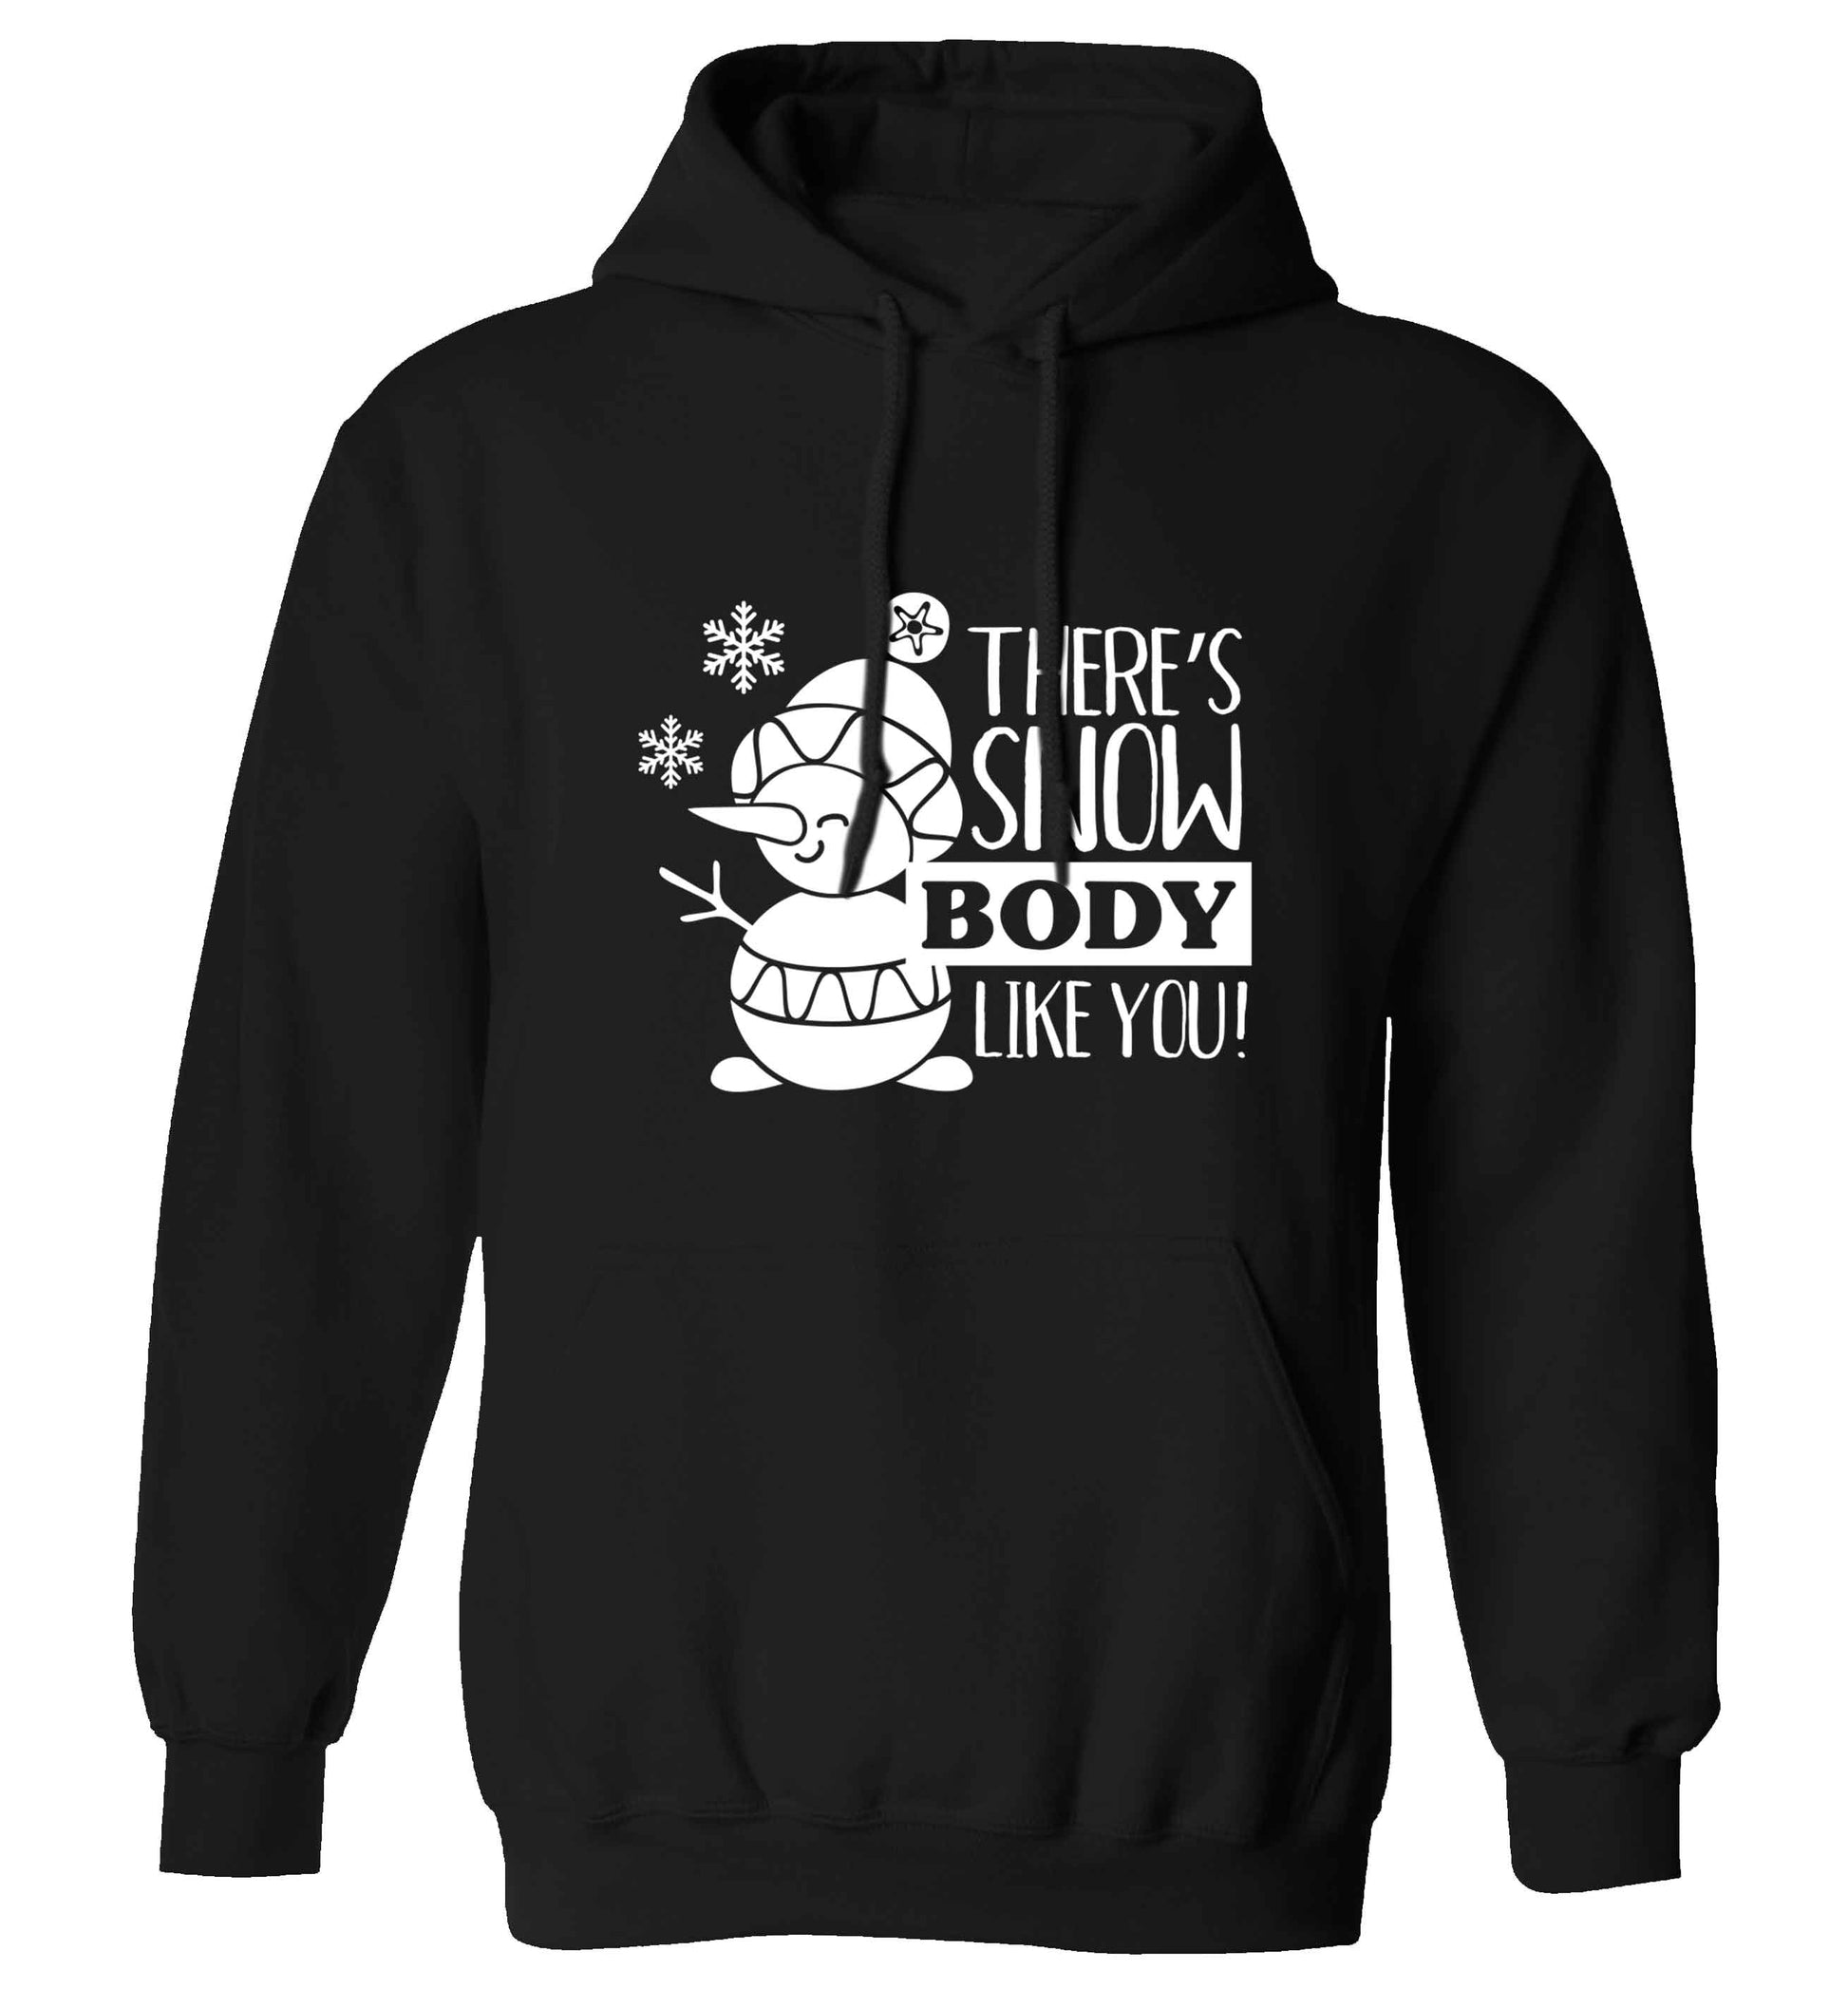 There's snow body like you adults unisex black hoodie 2XL